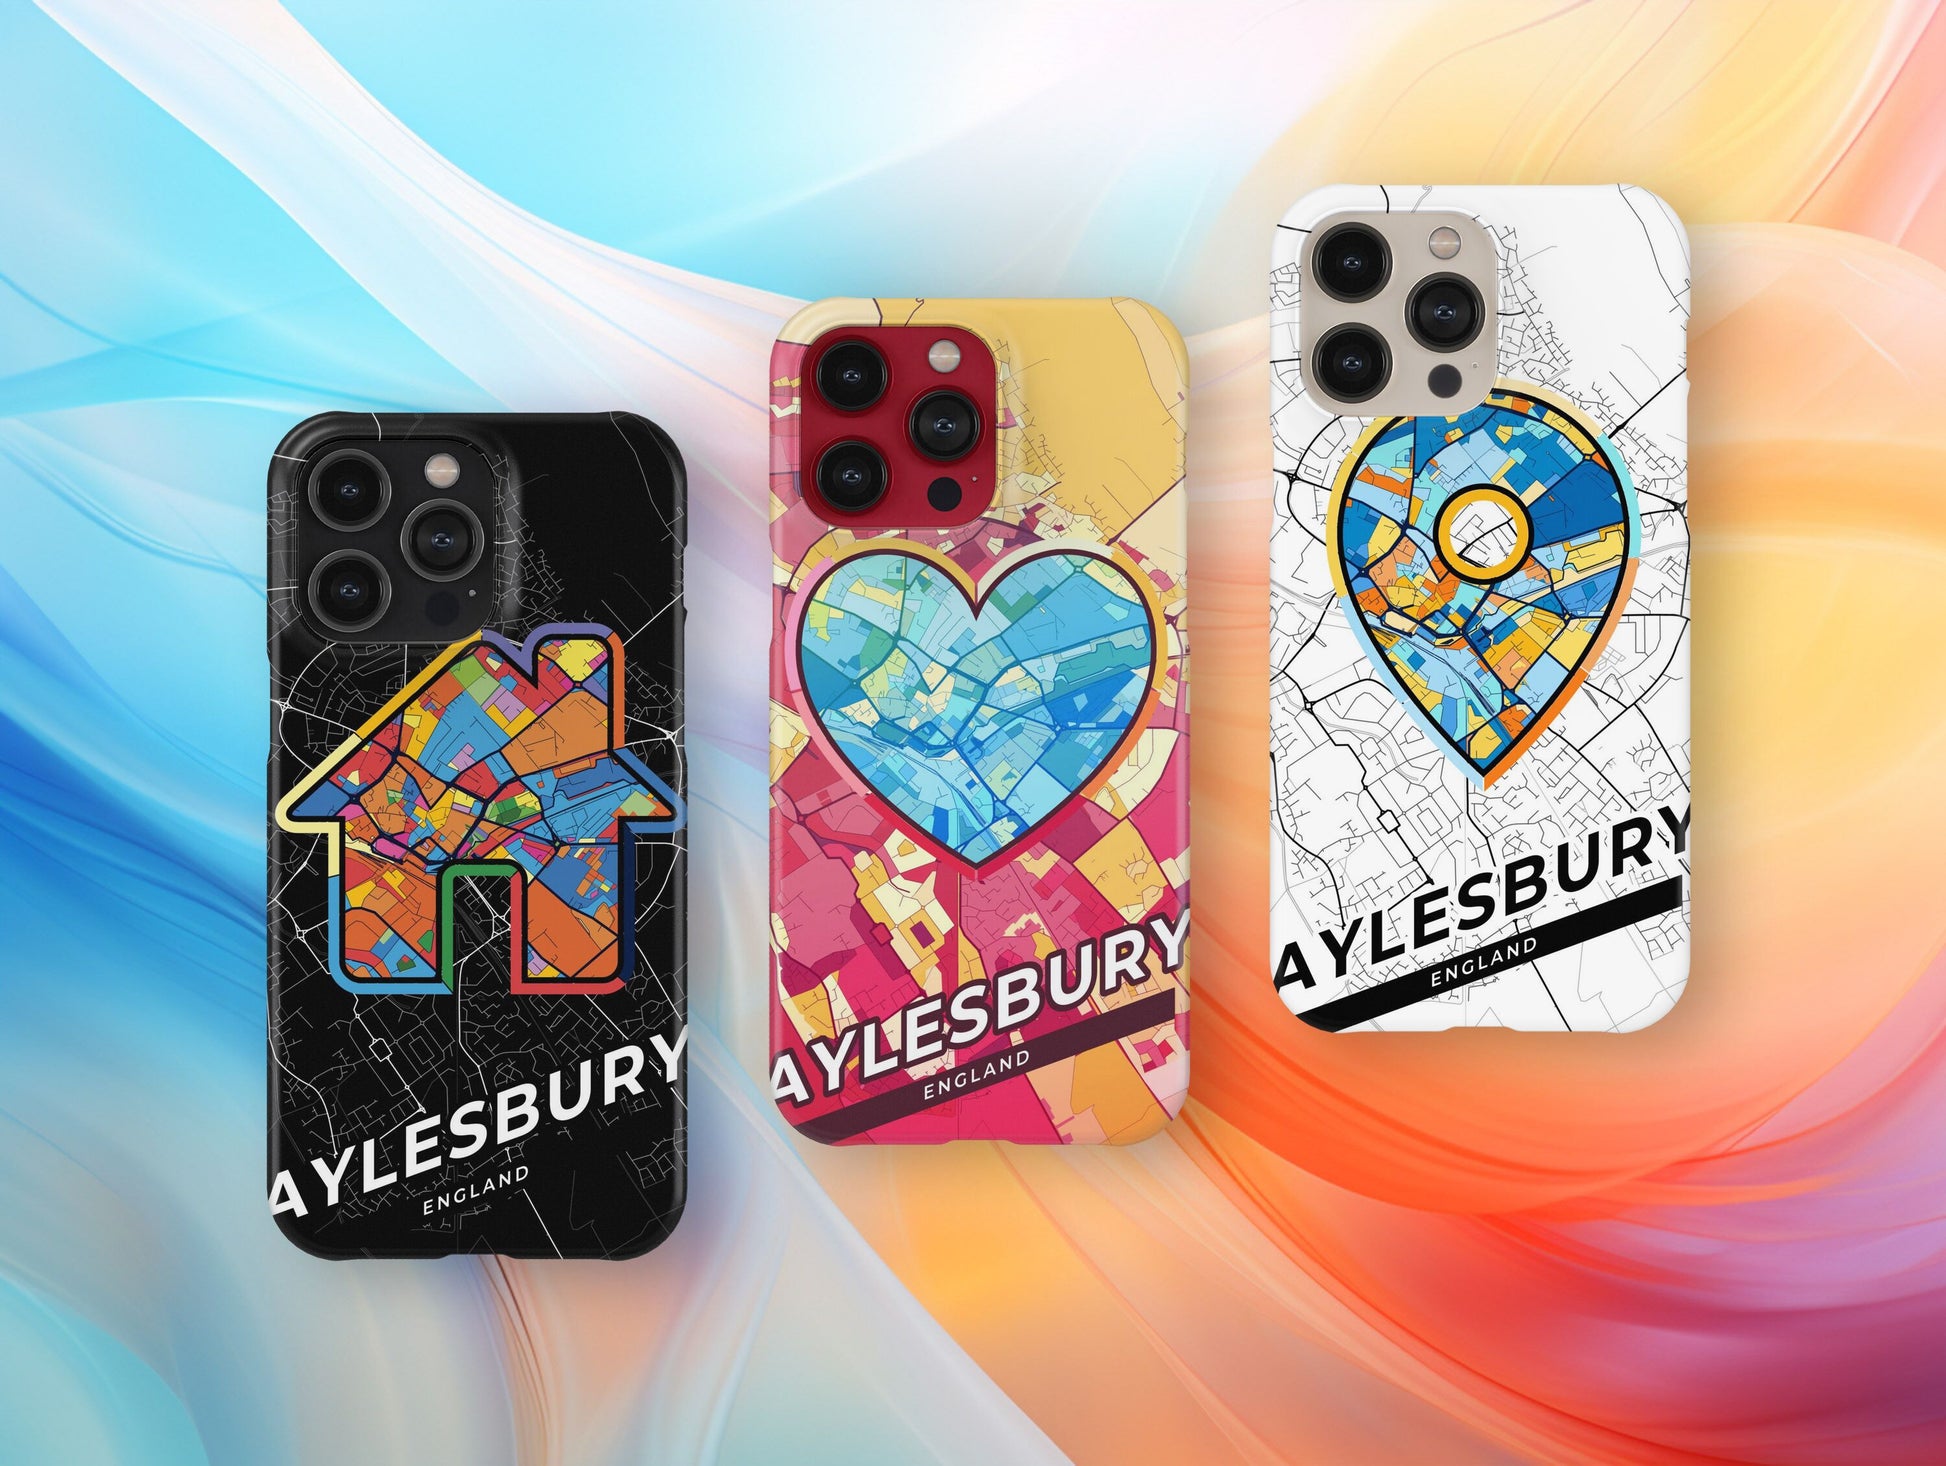 Aylesbury England slim phone case with colorful icon. Birthday, wedding or housewarming gift. Couple match cases.